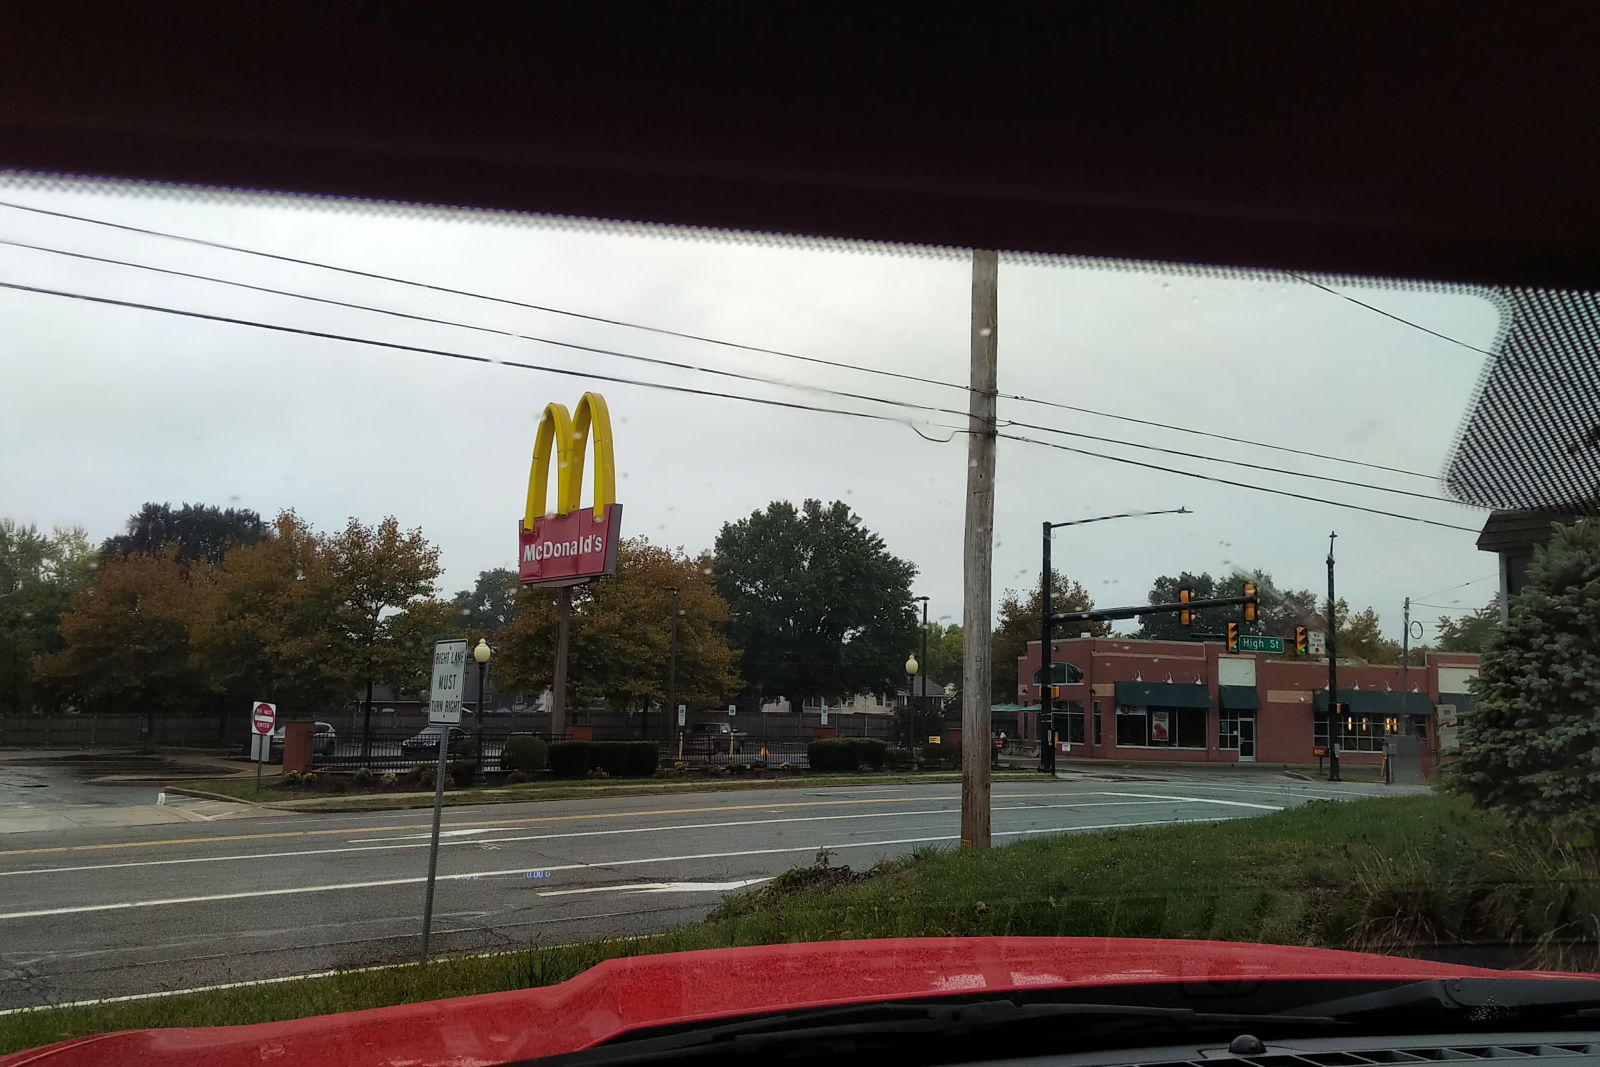 The East High Street McDonald’s. The 1960s building has been demolished and replaced, the current restaurant is on the former site of the Nagle Motors Dodge dealership, the Rosedale Diner was where the McDonald’s parking lot is now.